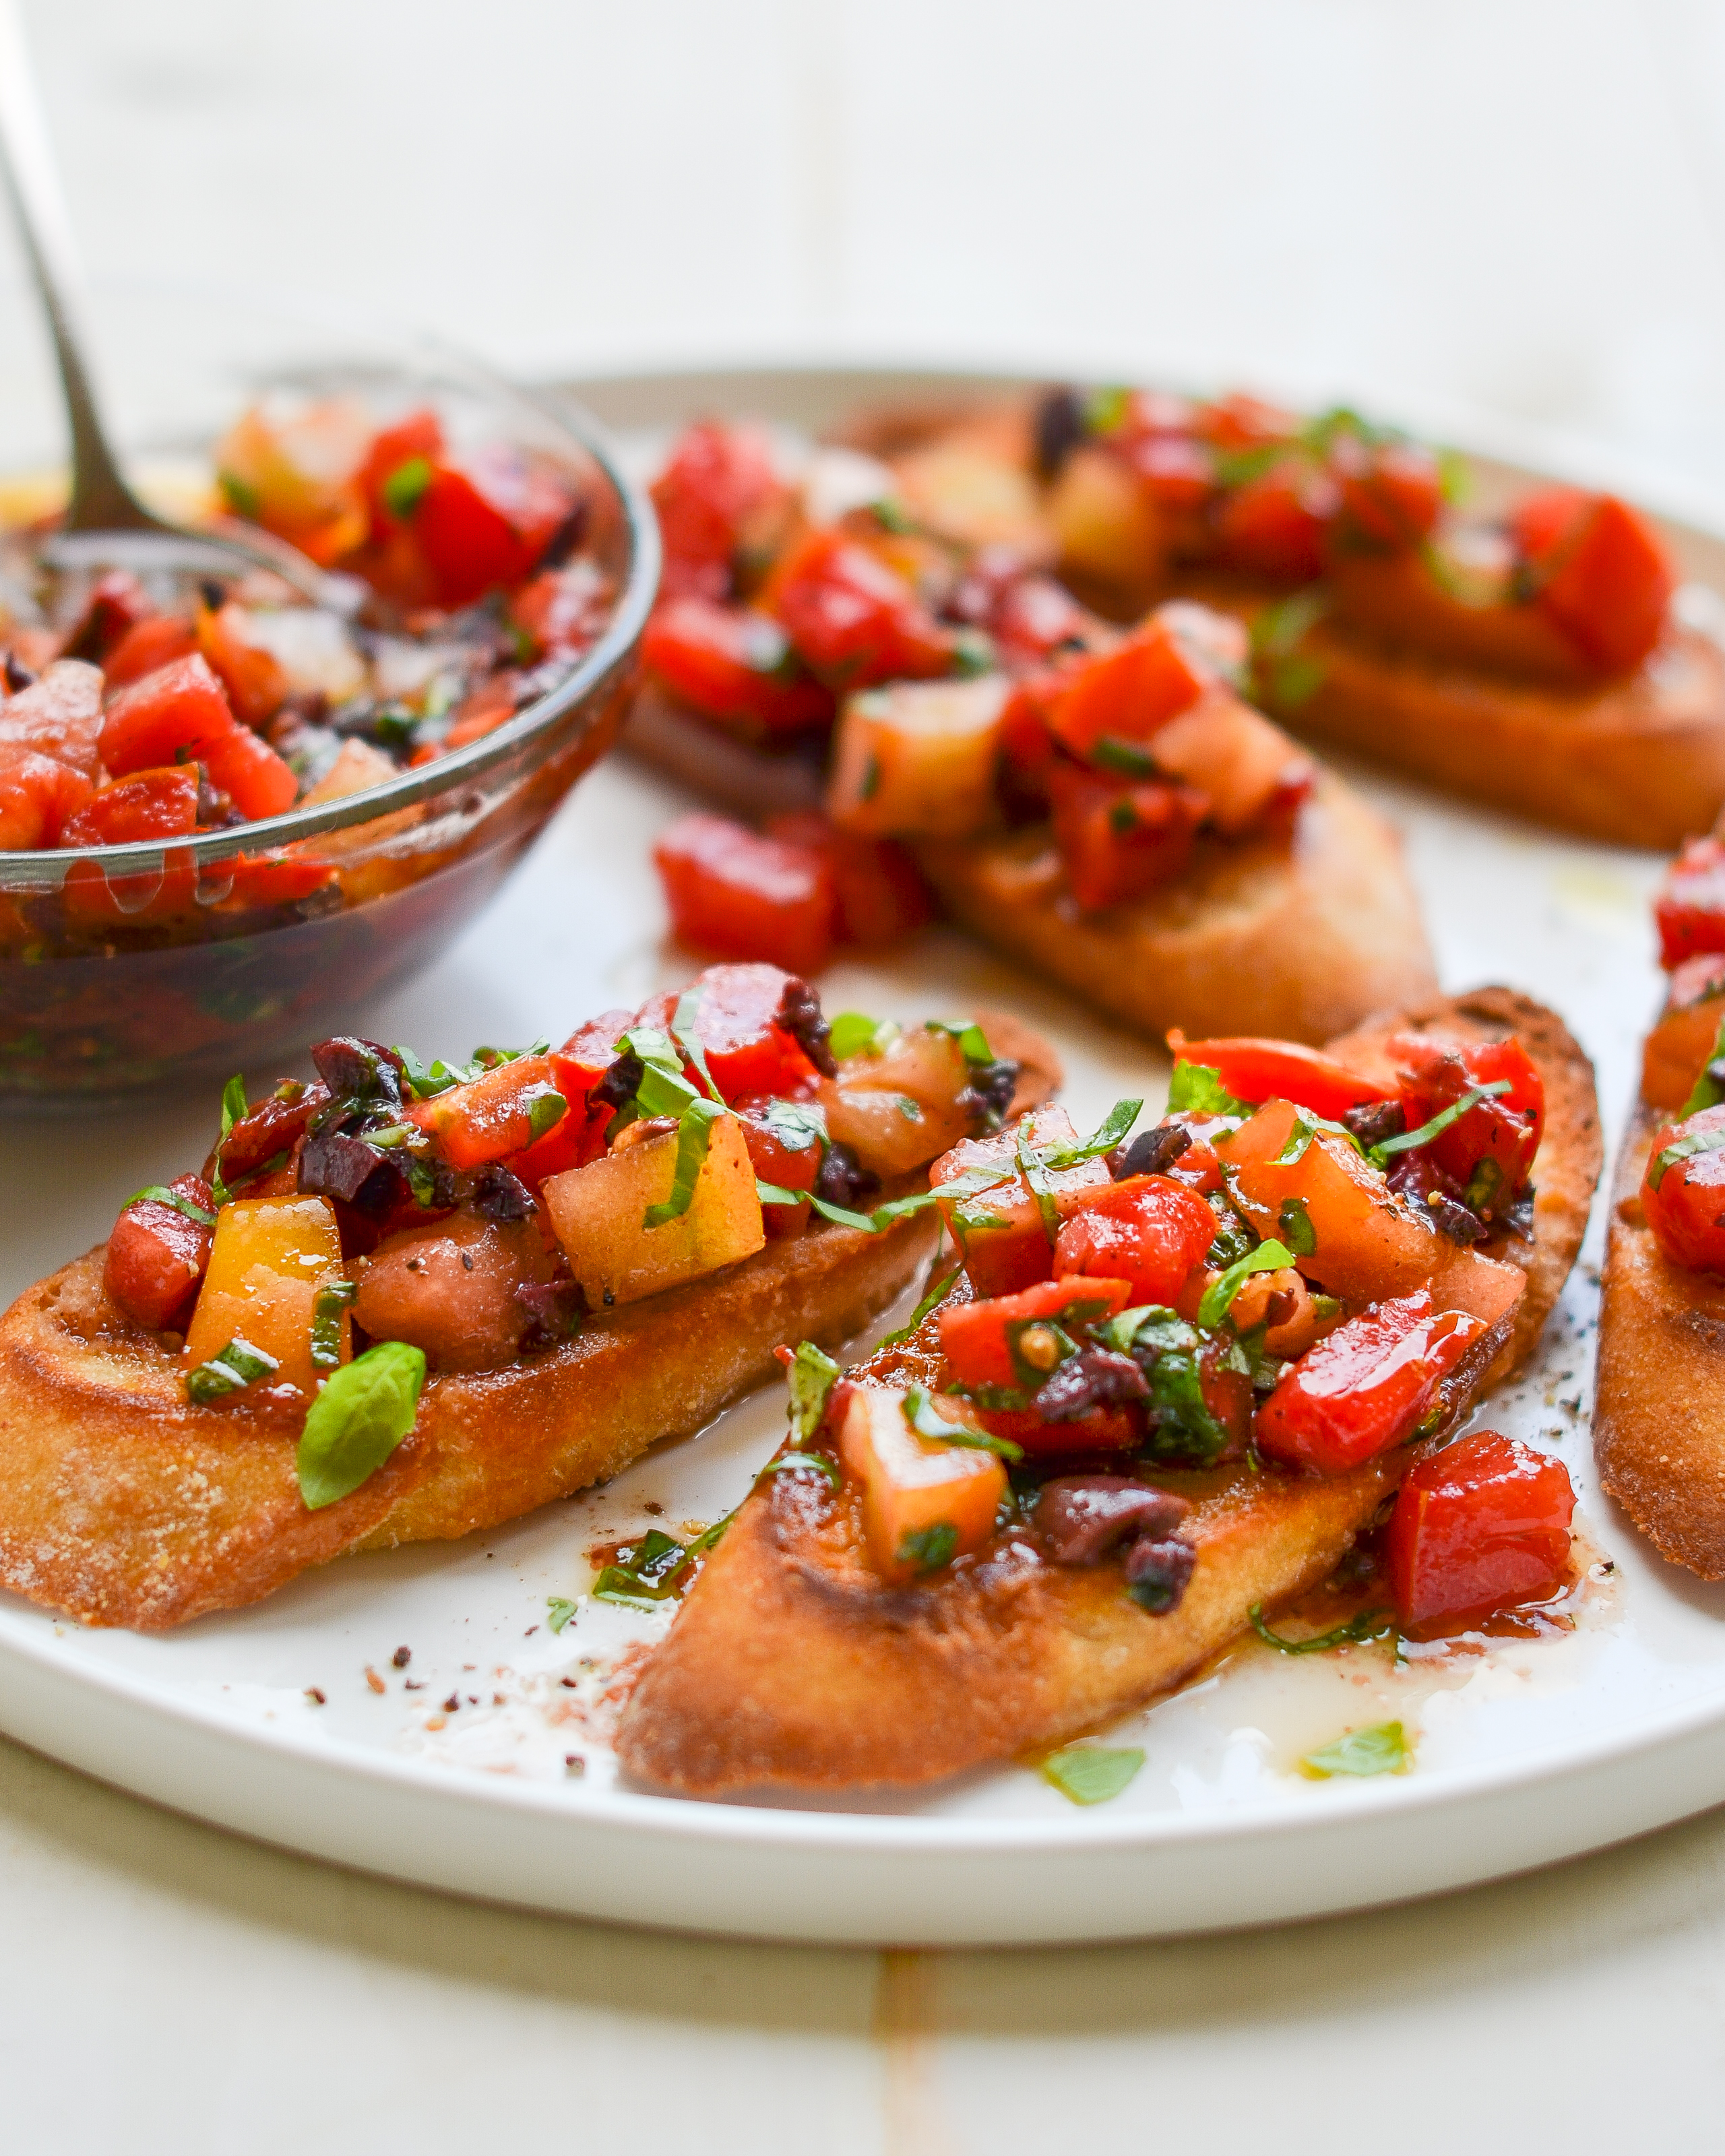 Bruschetta with Heirloom Tomatoes, Olives and Basil